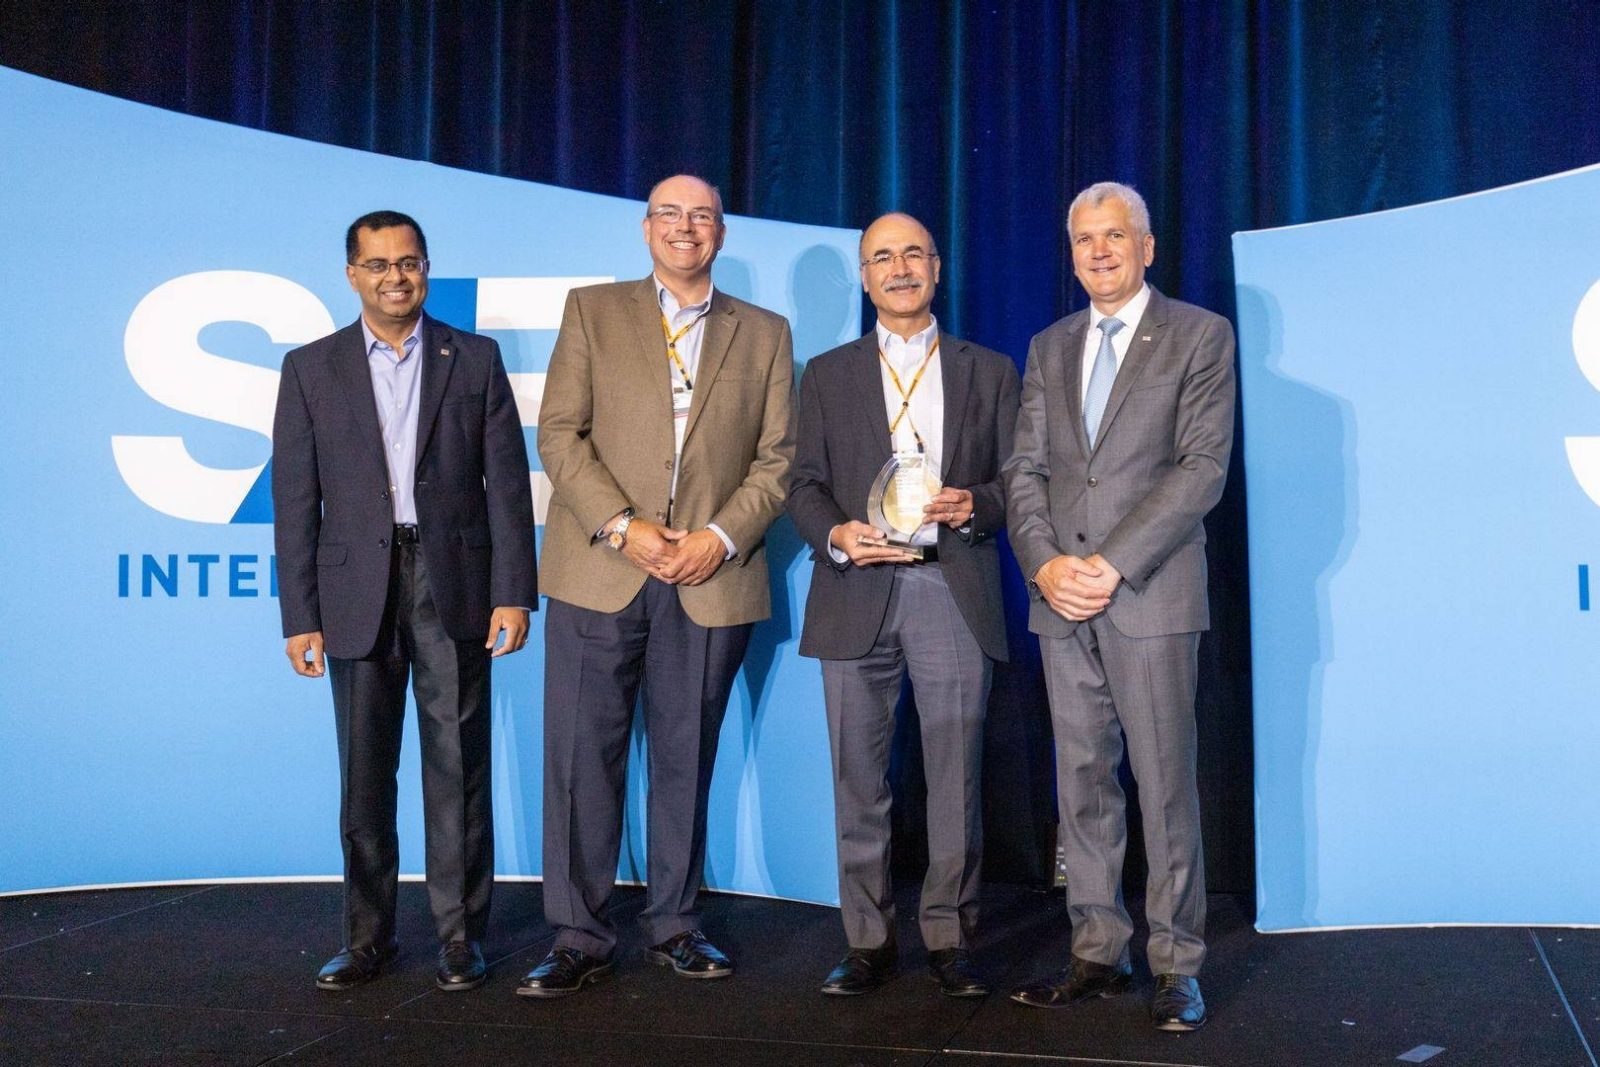 Congratulations to Dr. Ahmadian for being honored with SAE International/Magnus Hendrickson Innovation Award!